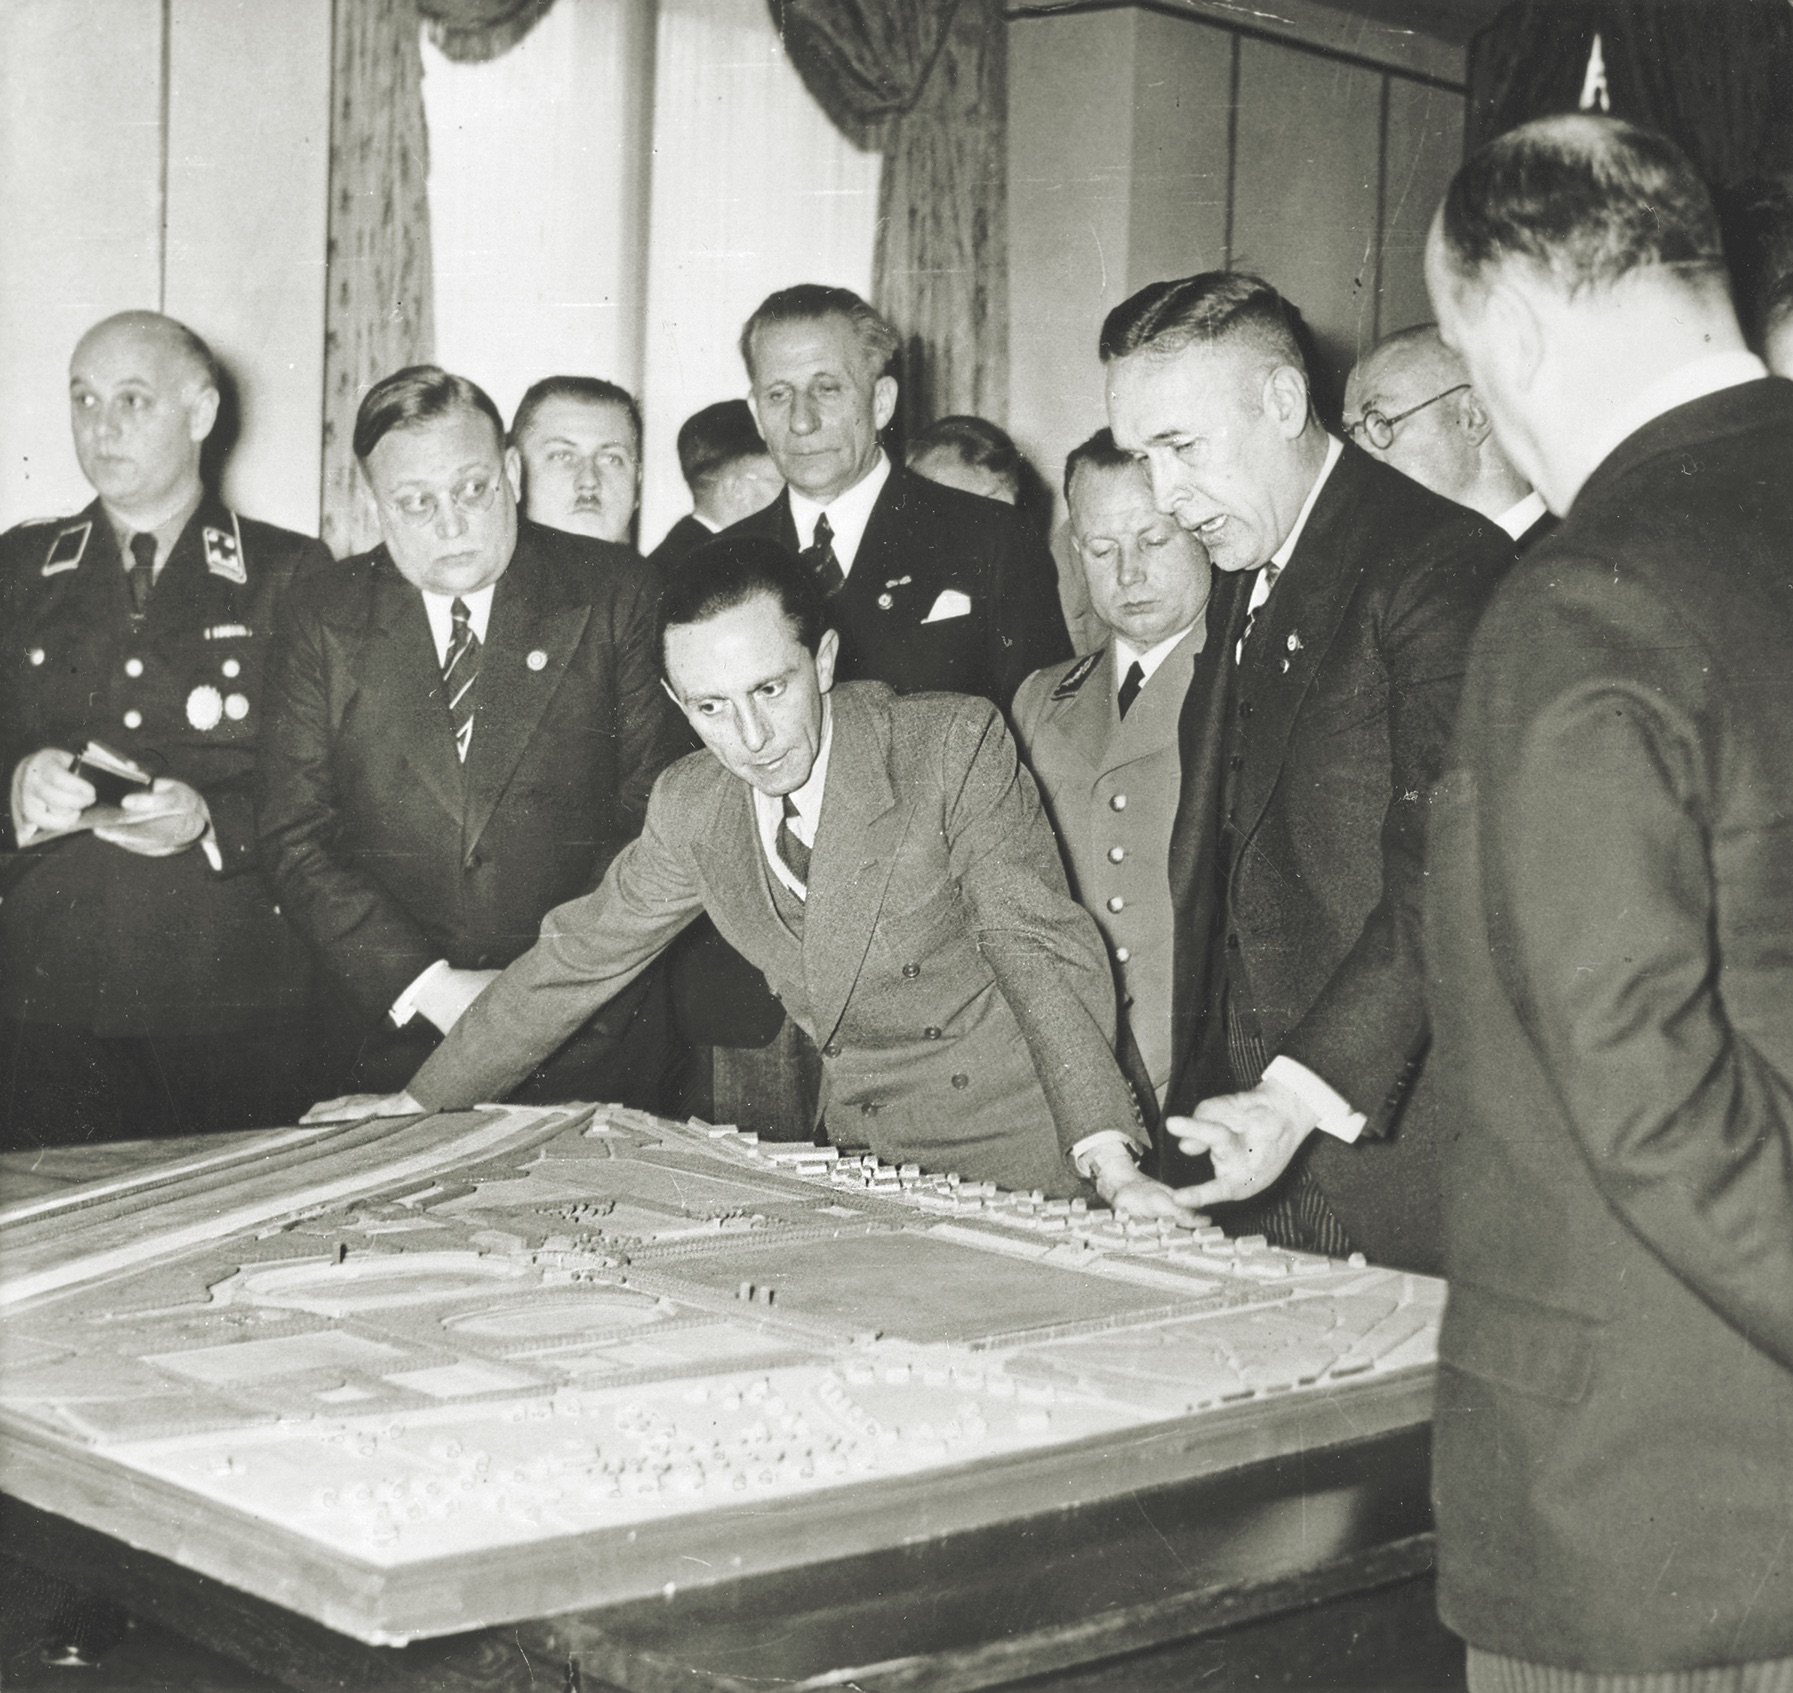 Nazi propanganda minister Joseph Goebbels (right, with hands on table) bent the work of 16th-century French astronomer and mystic Michel de Nostradame, better known as Nostradamus, to his own ends. (Ullstein Bild/Getty Images)